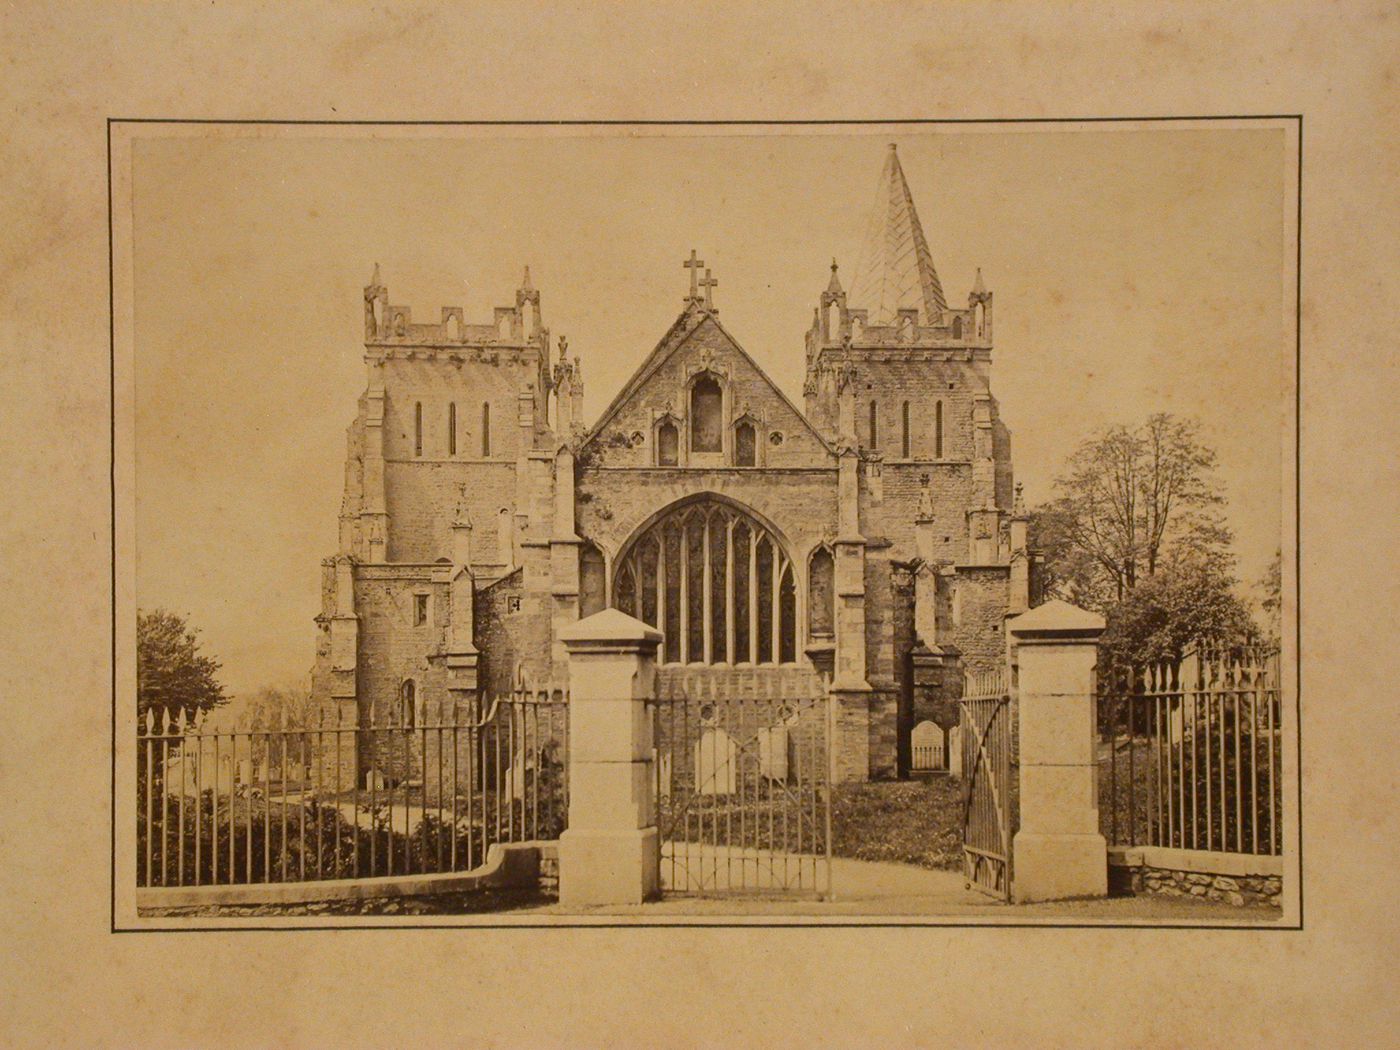 View through the fence and gateway of a churchyard showing the church and cemetery, England